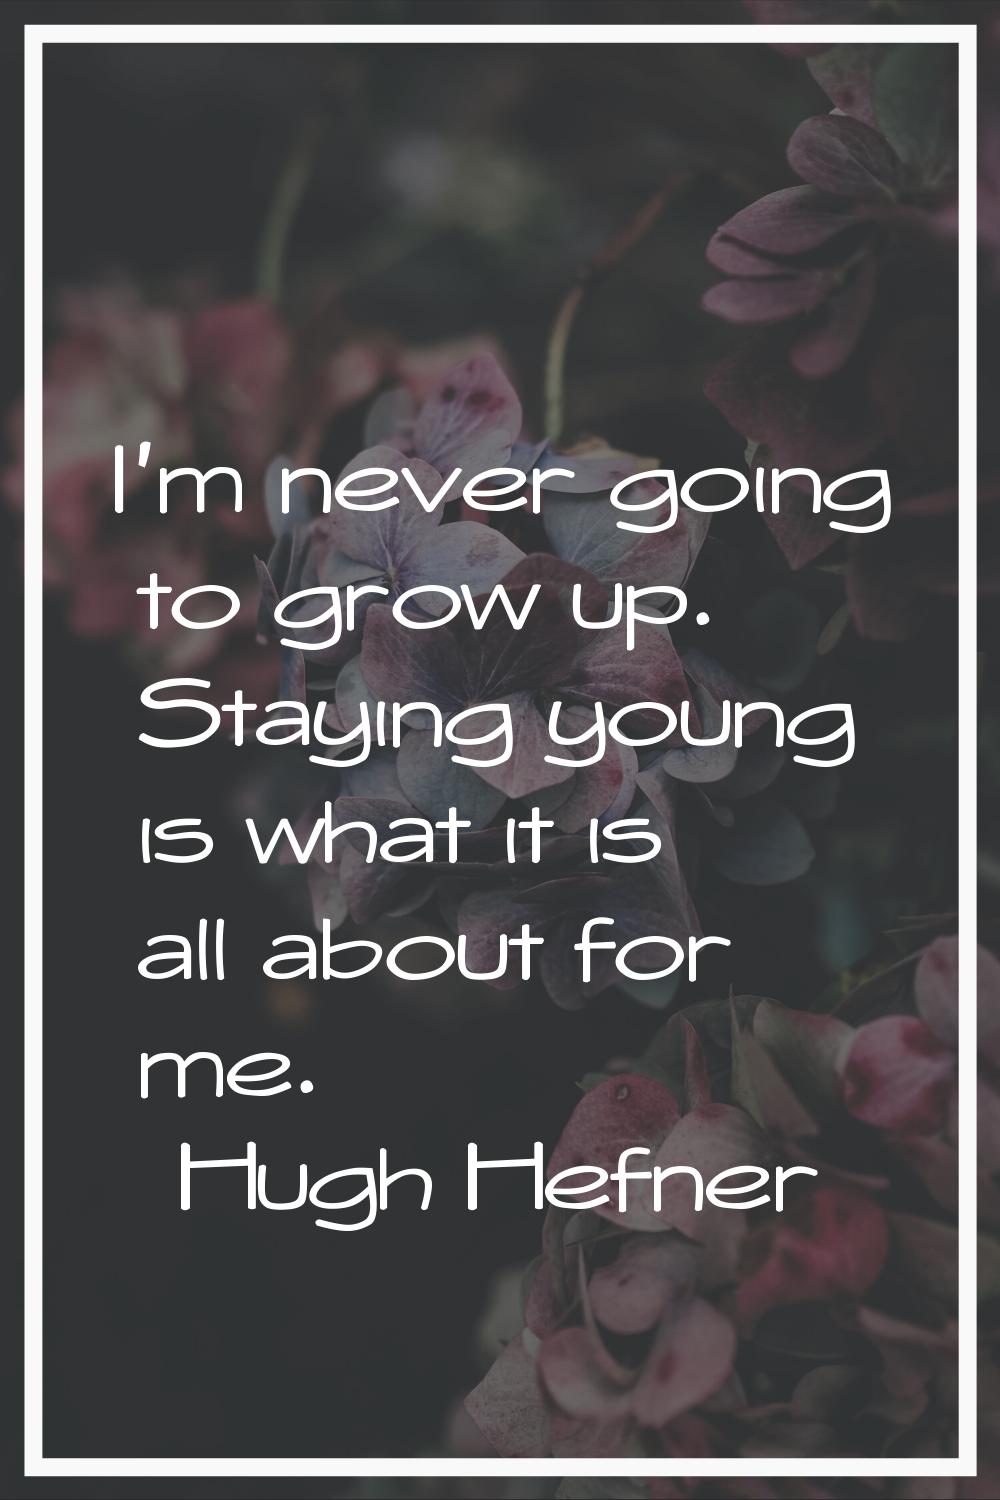 I'm never going to grow up. Staying young is what it is all about for me.